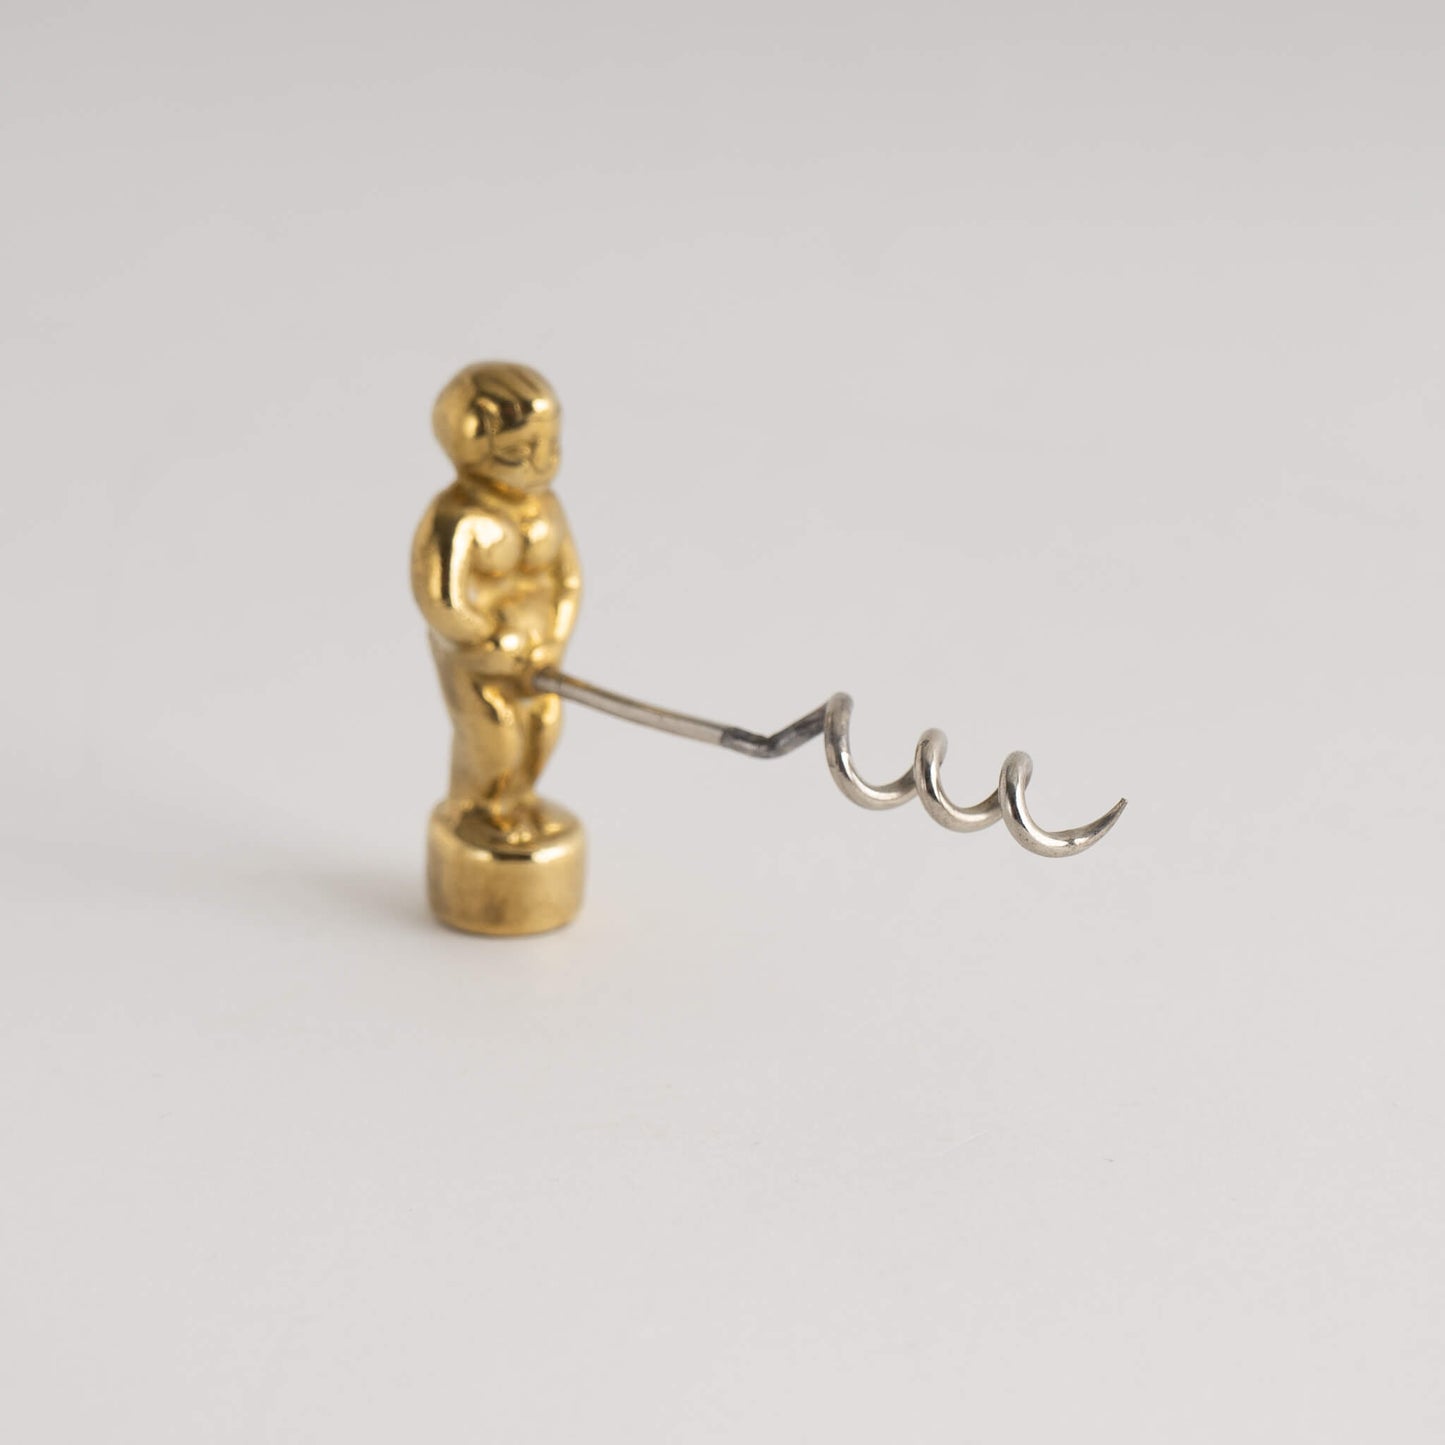 Load image into Gallery viewer, Vintage Brass Risque Man Cork Bottle Opener
